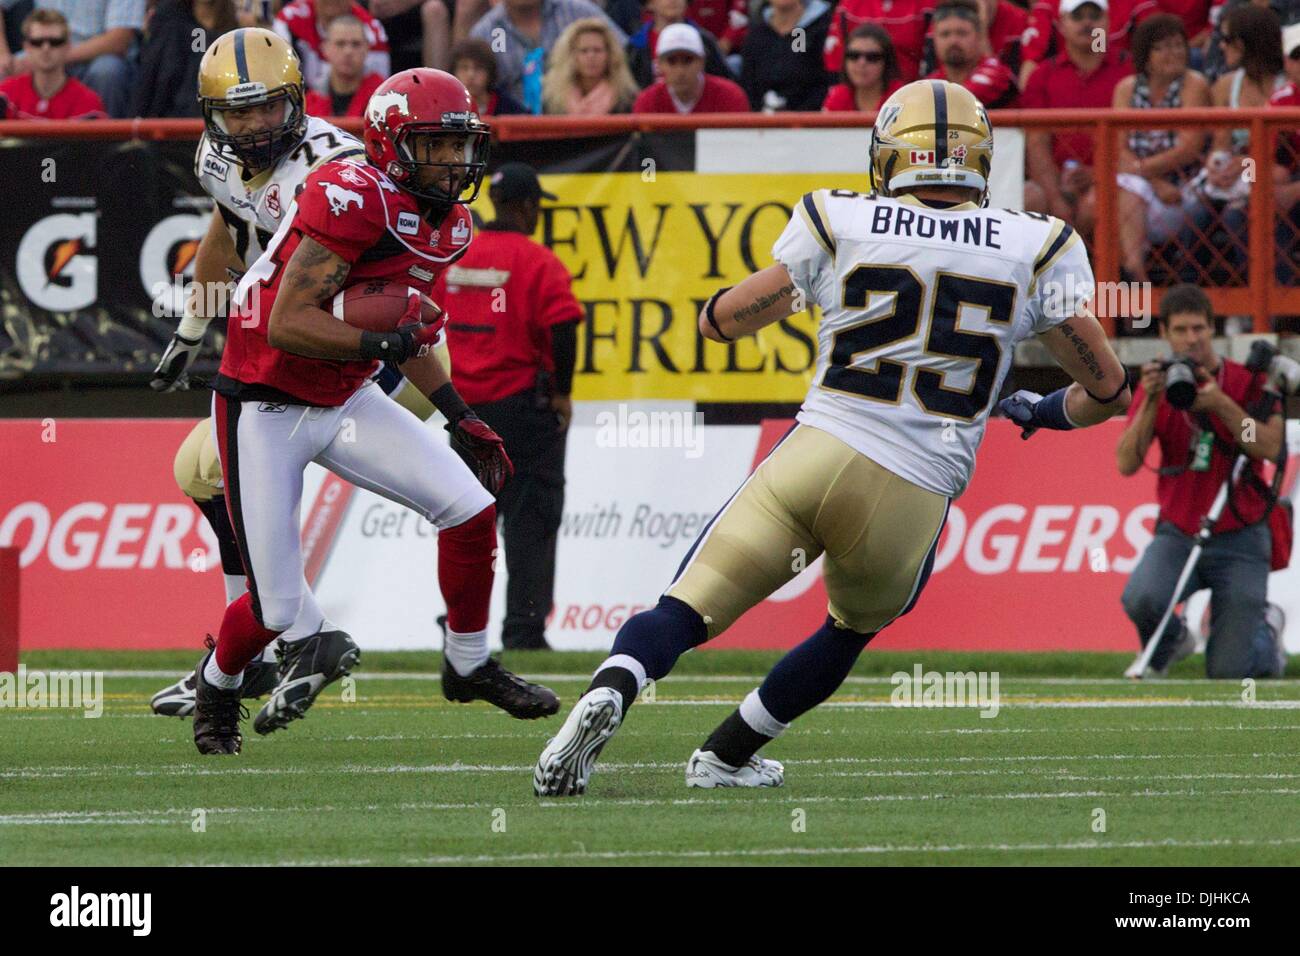 July 31, 2010 - Calgary, Alberta, Canada - 31 July 2010: Calgary Stampeders receiver Deon Murphy (24) during a game against the Winnipeg Blue Bombers at McMahon Stadium in Calgary, Alberta. The Stamps lead the Bombers 17-8 at half time..Mandatory Credit: Irena Thompson / Southcreek Global (Credit Image: Â© Southcreek Global/ZUMApress.com) Stock Photo